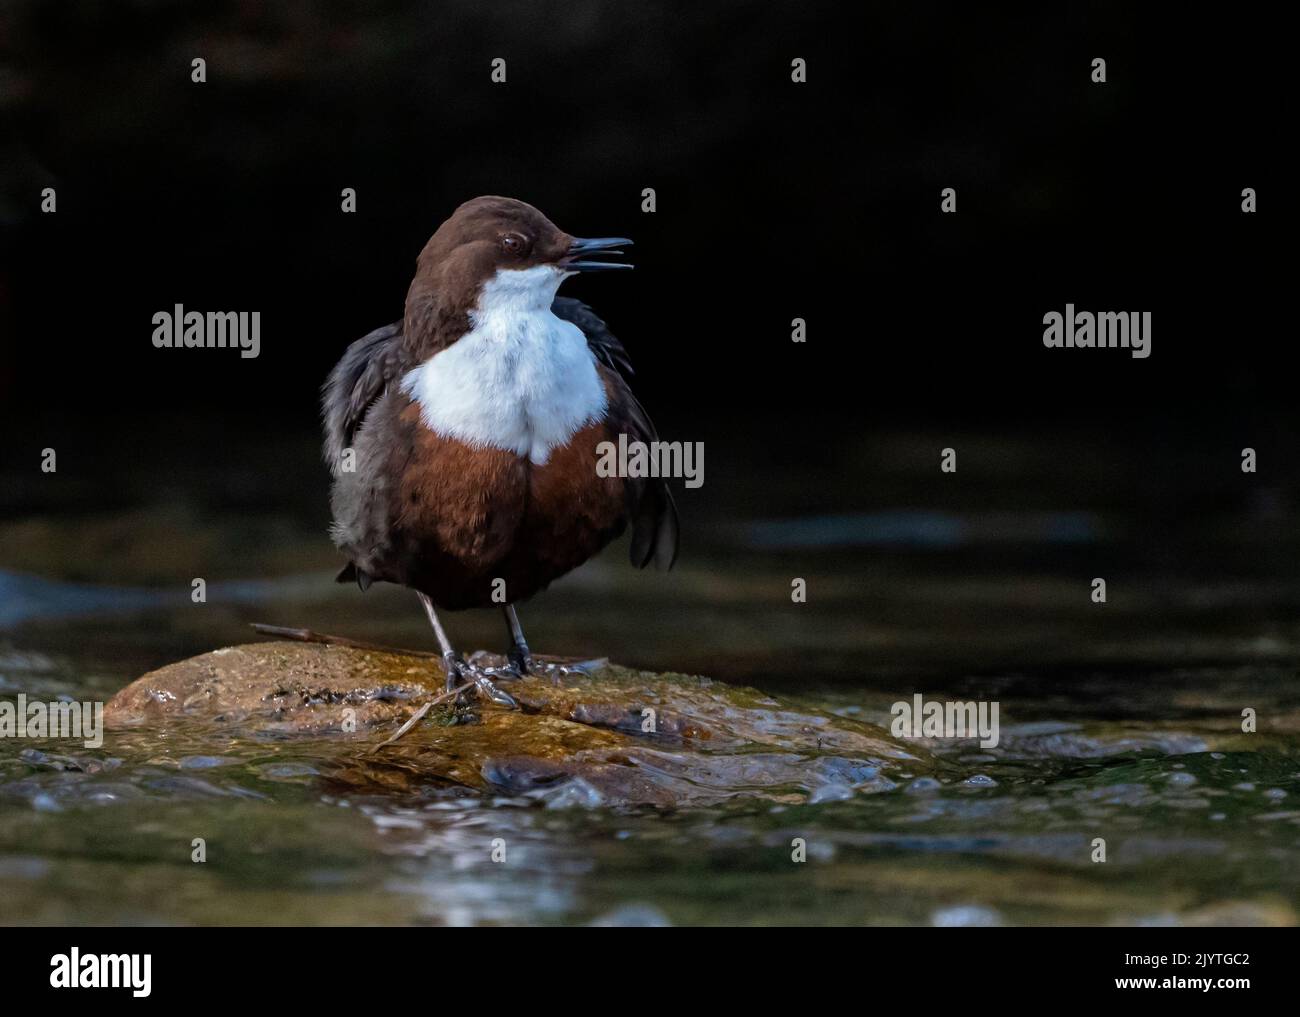 Dipper (Cinclus cinclus) standing in water and calling, England Stock Photo